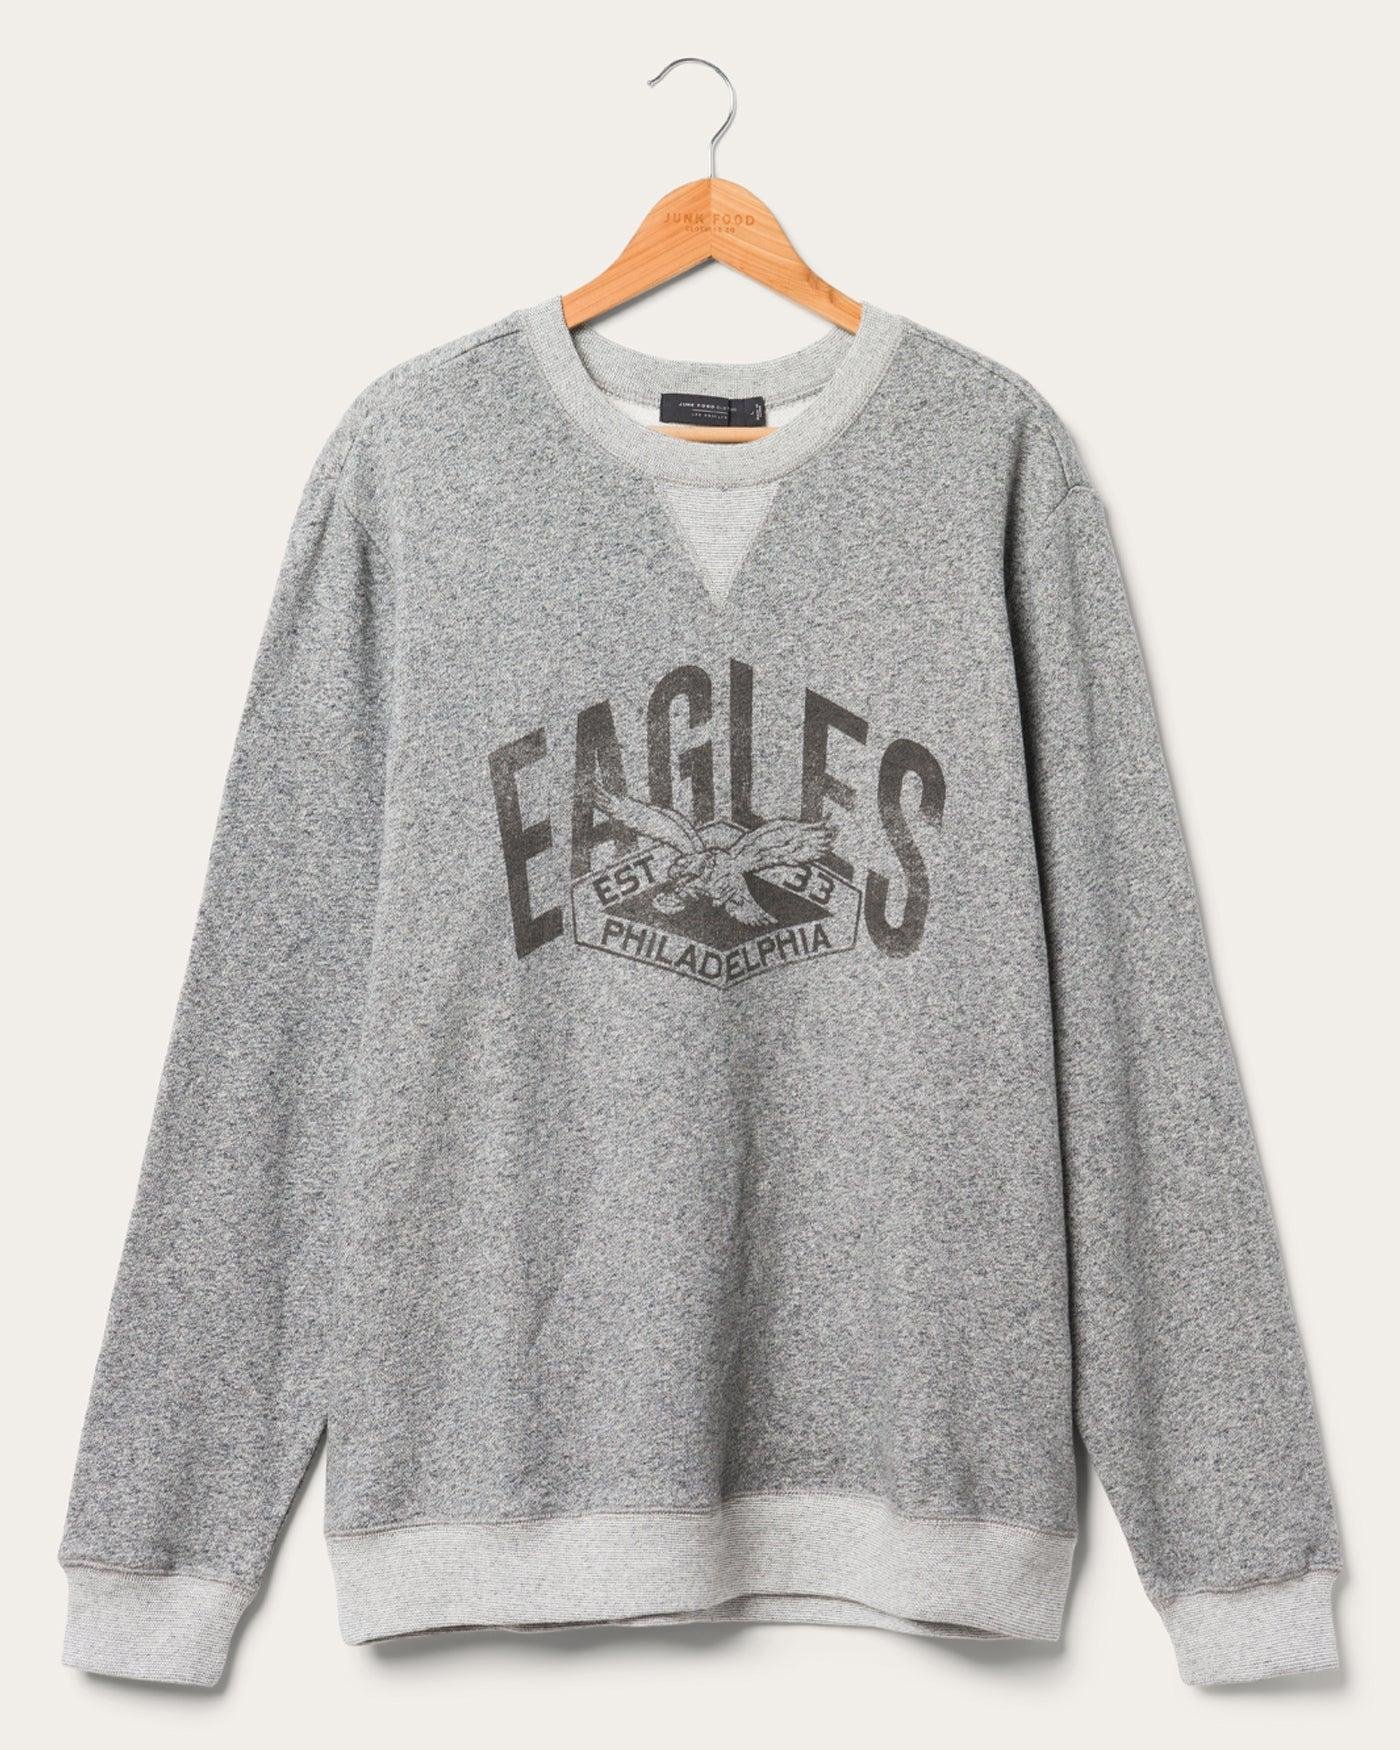 Junk Food Clothing Eagles Formation Fleece Pullover by JUNK FOOD CLOTHING